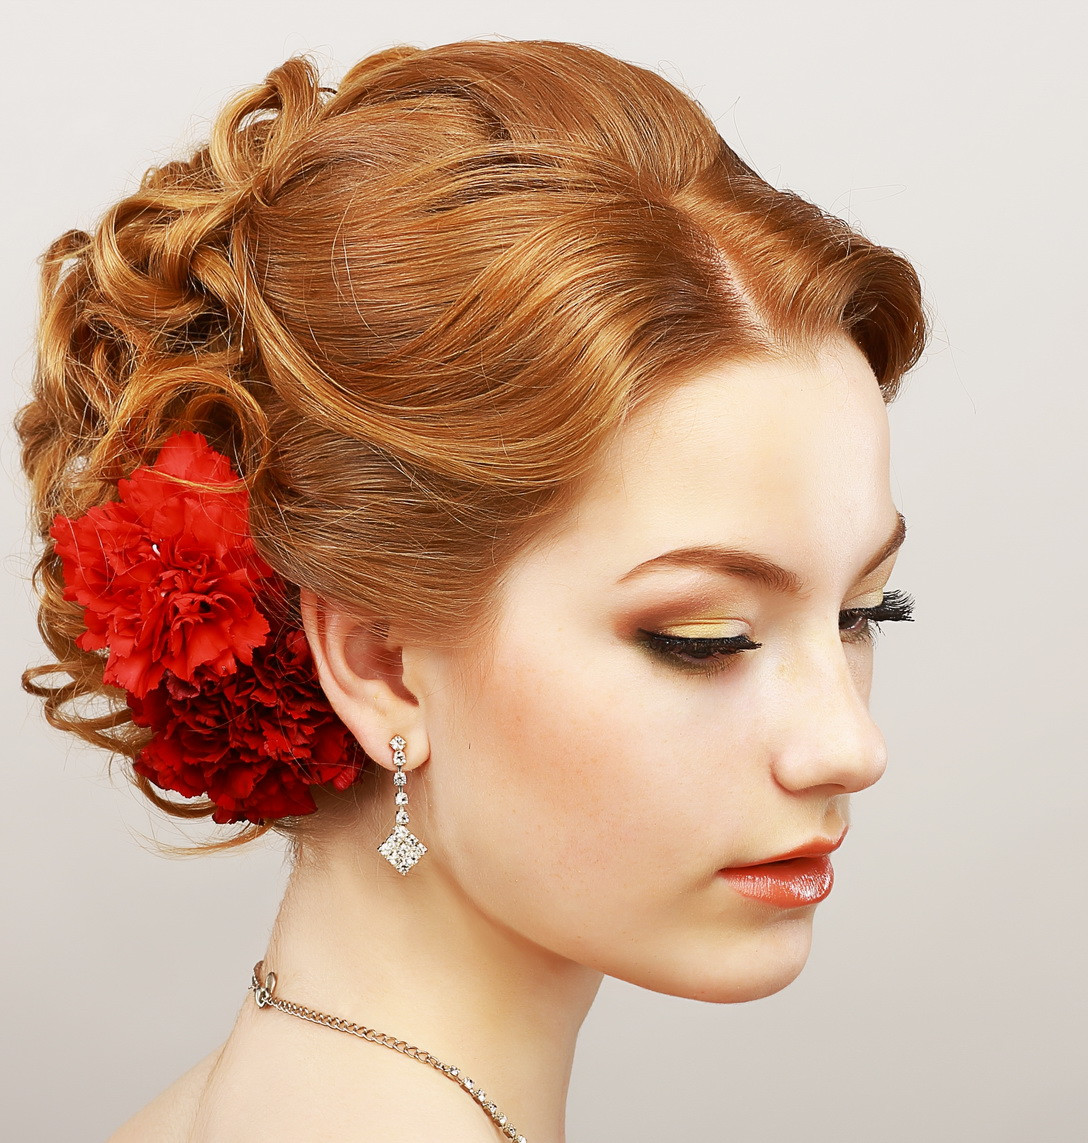 Prom Updo Hairstyles Short Hair
 16 Easy Prom Hairstyles for Short and Medium Length Hair